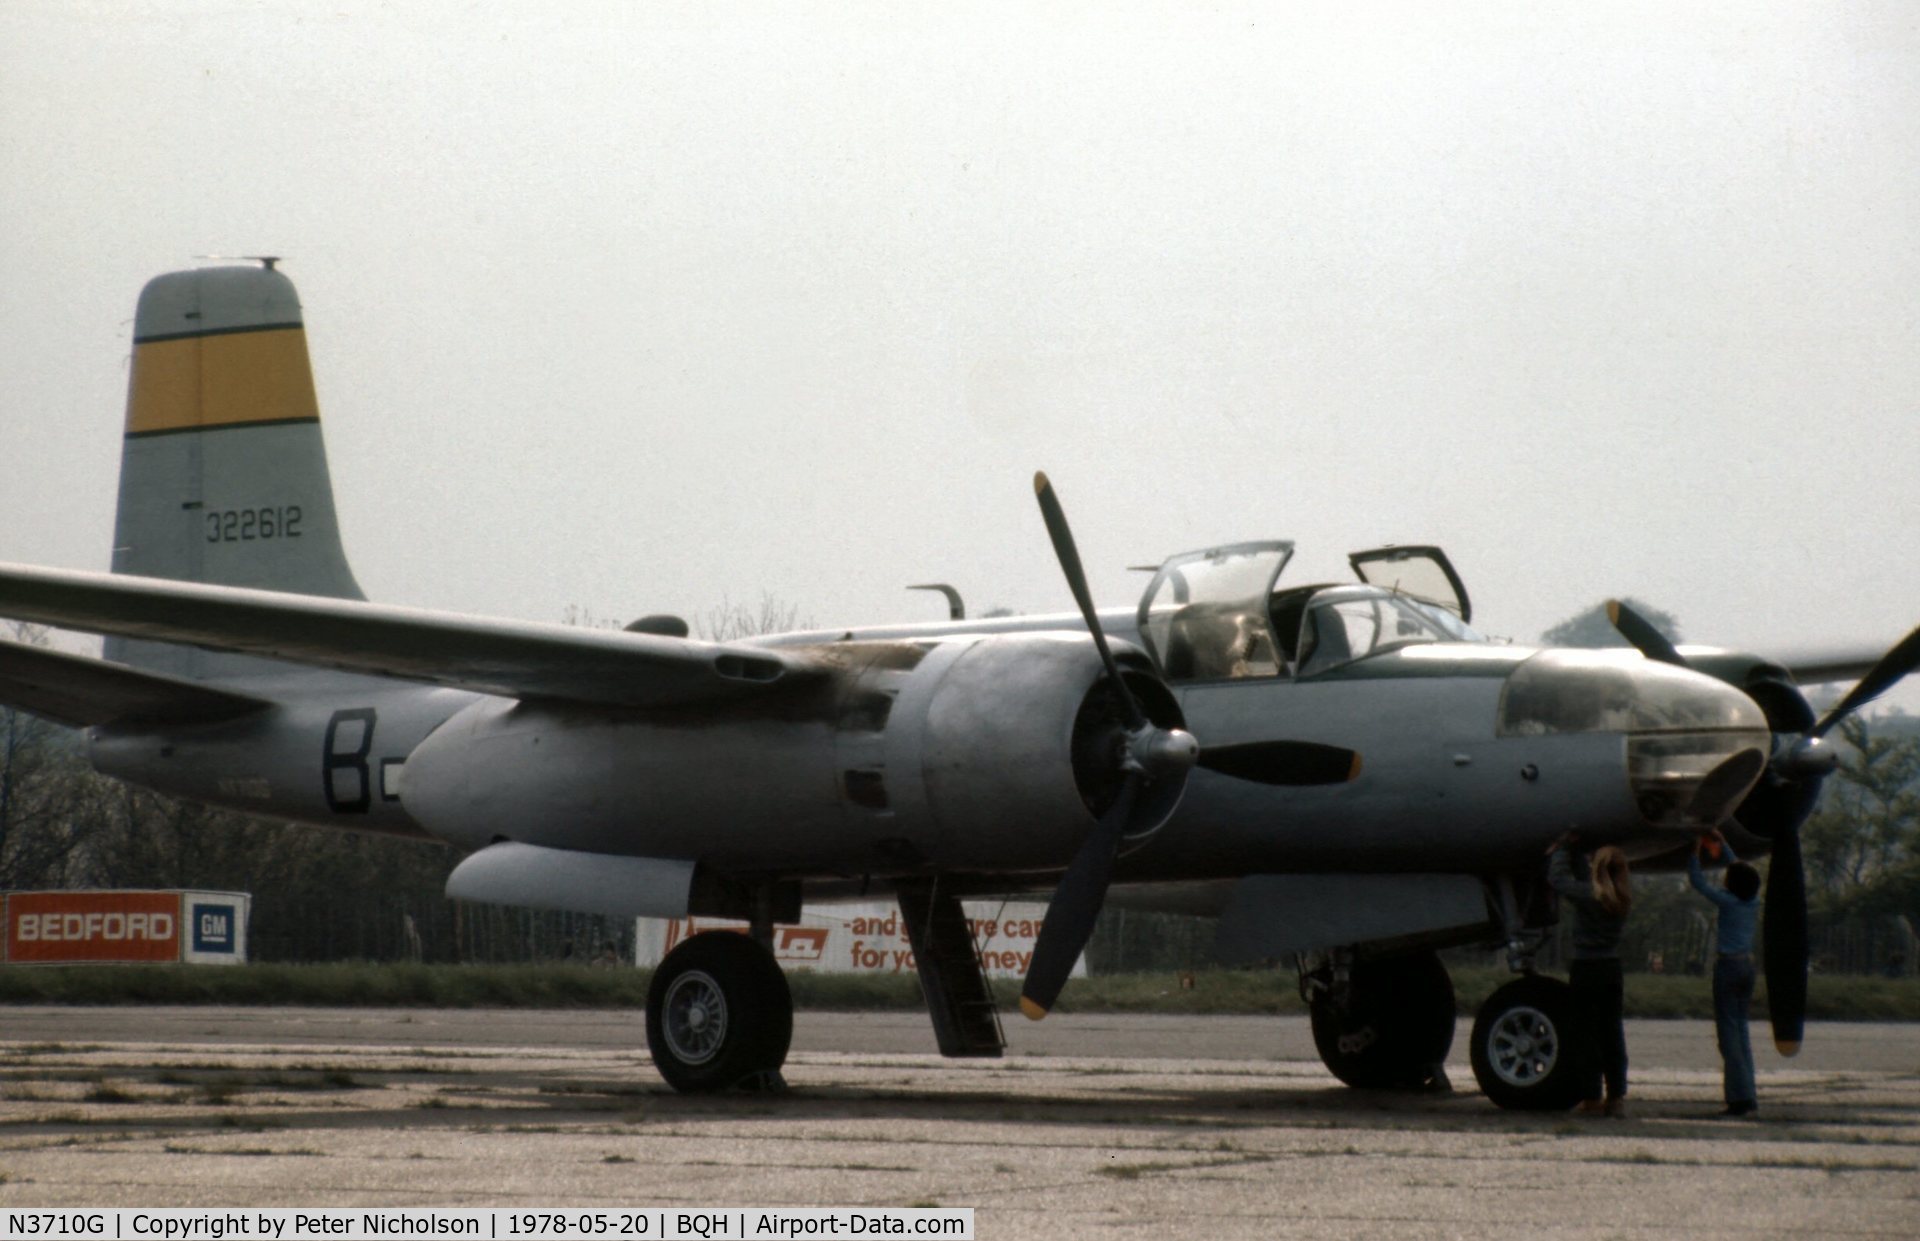 N3710G, 1943 Douglas A-26C Invader C/N 18759, Another view of the A-26C Invader at the 1978 Biggin Hill Air Fair.